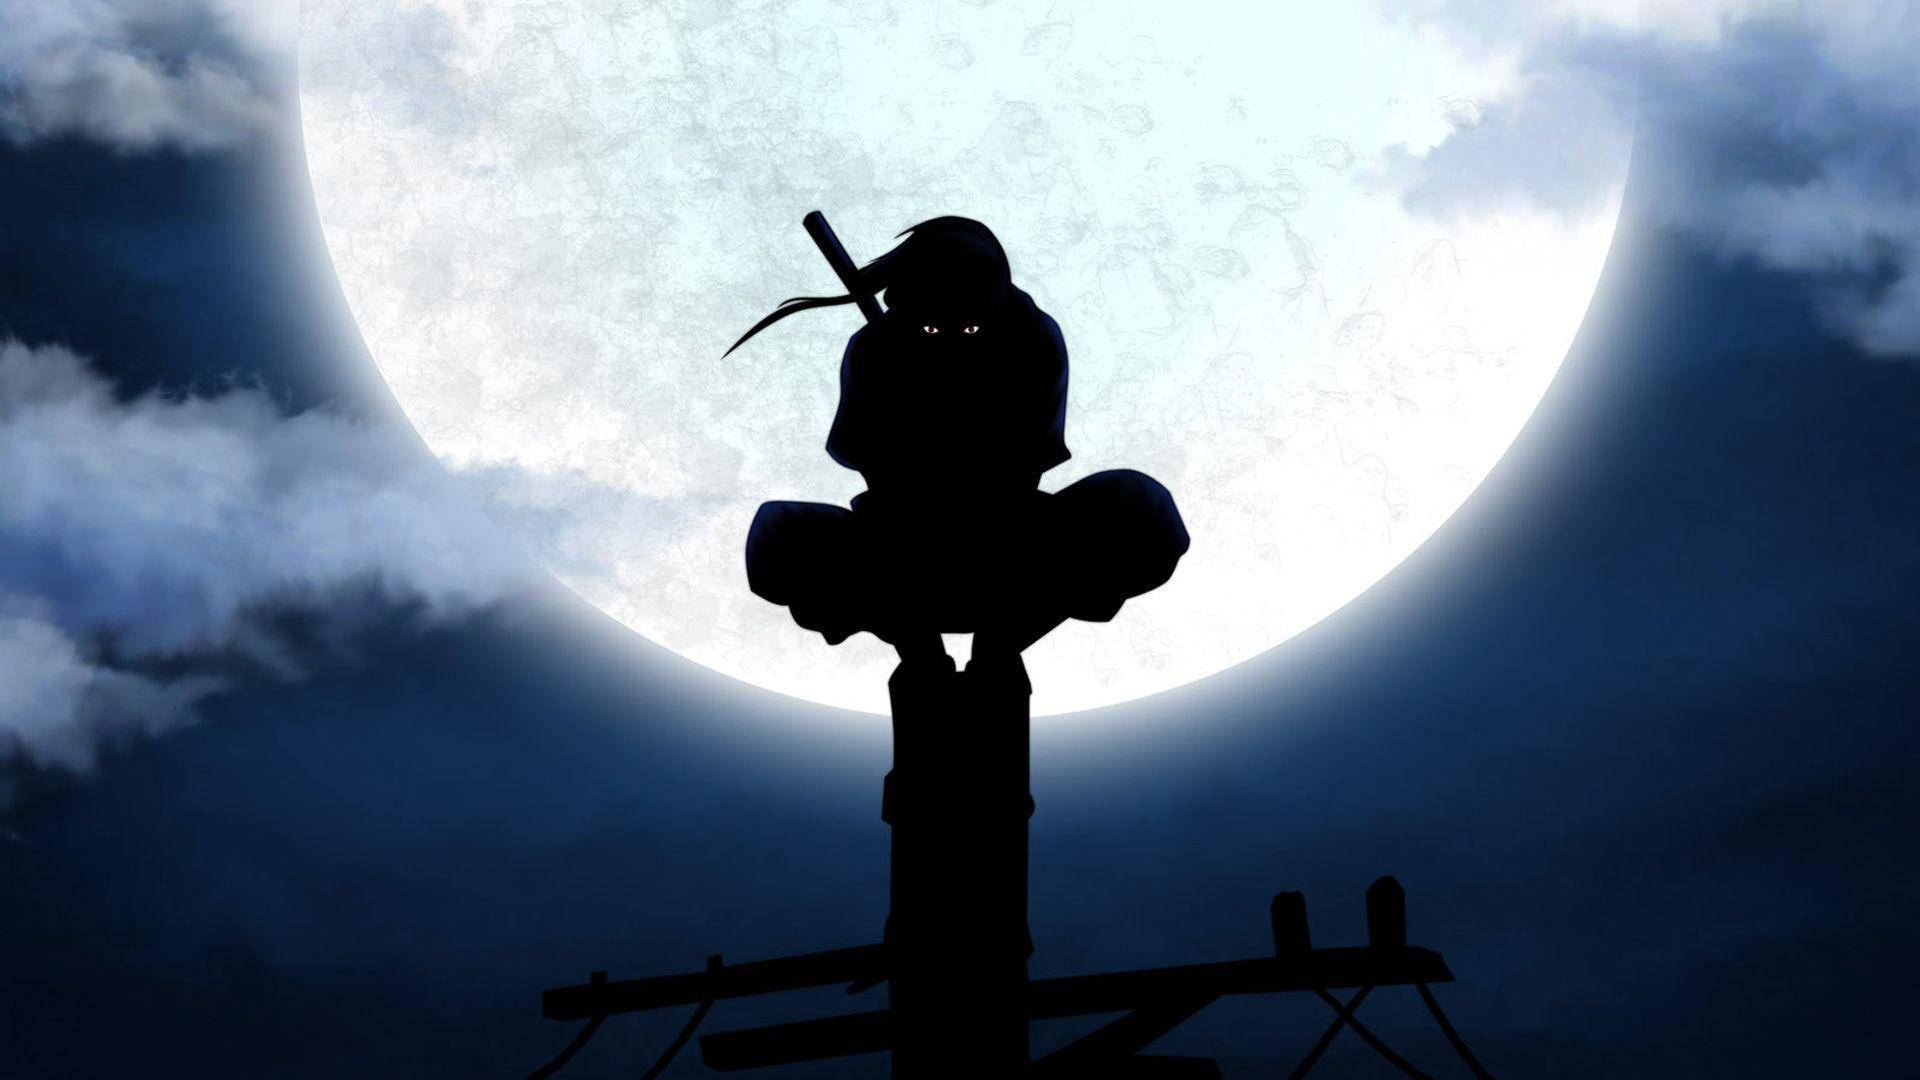 Itachi 1920X1080 Wallpaper and Background Image